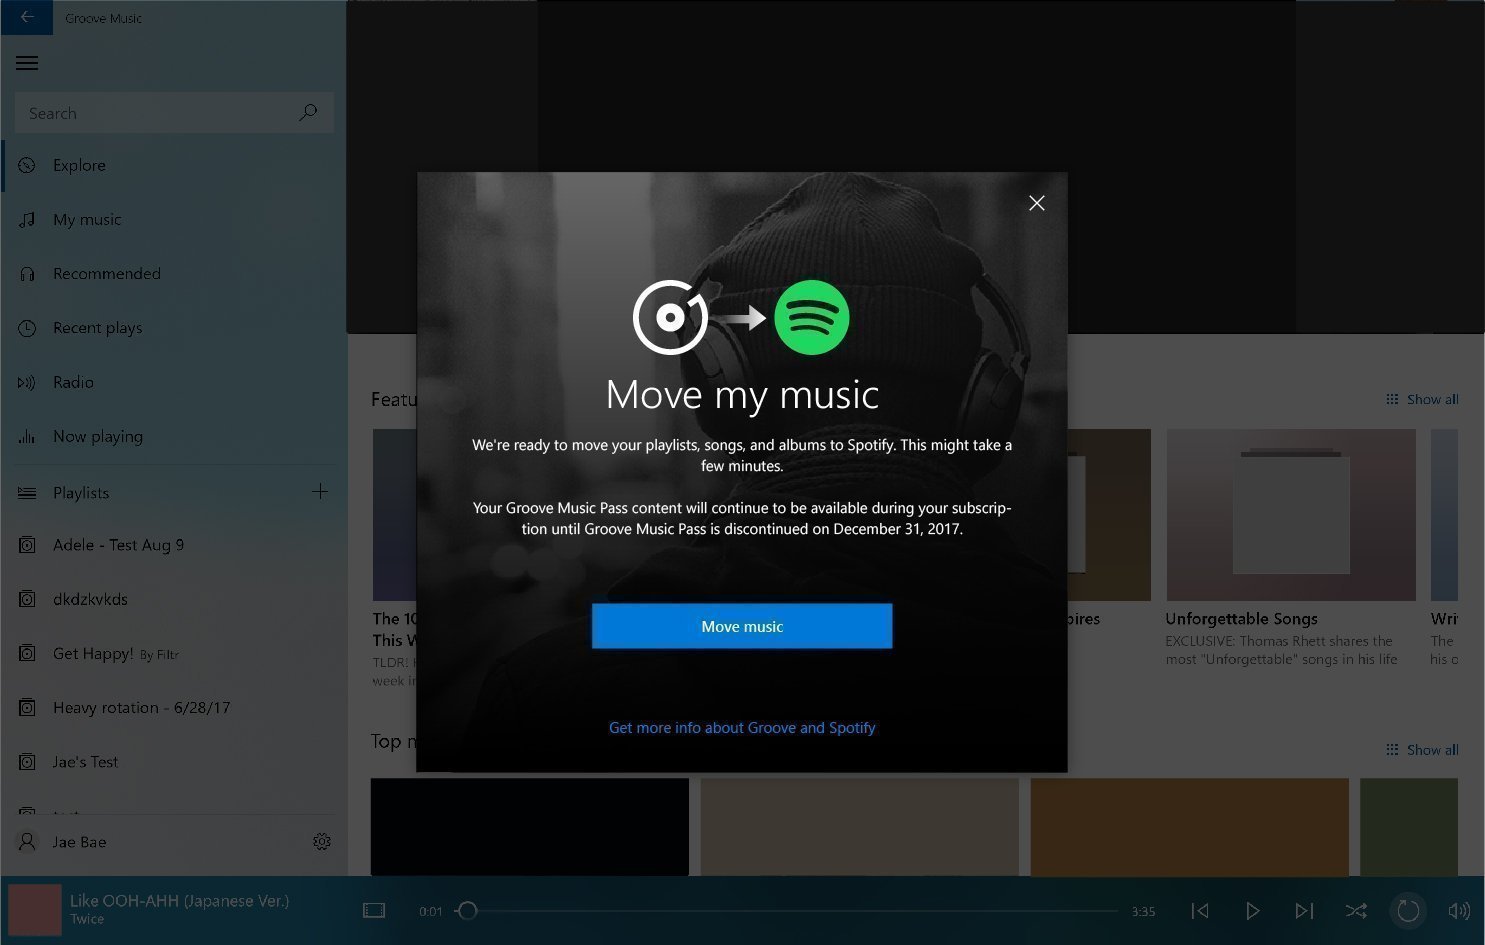 ndis.sys bsod listening to music via spotify 8e2a039485d9789f8aabf55a8a768205.jpg